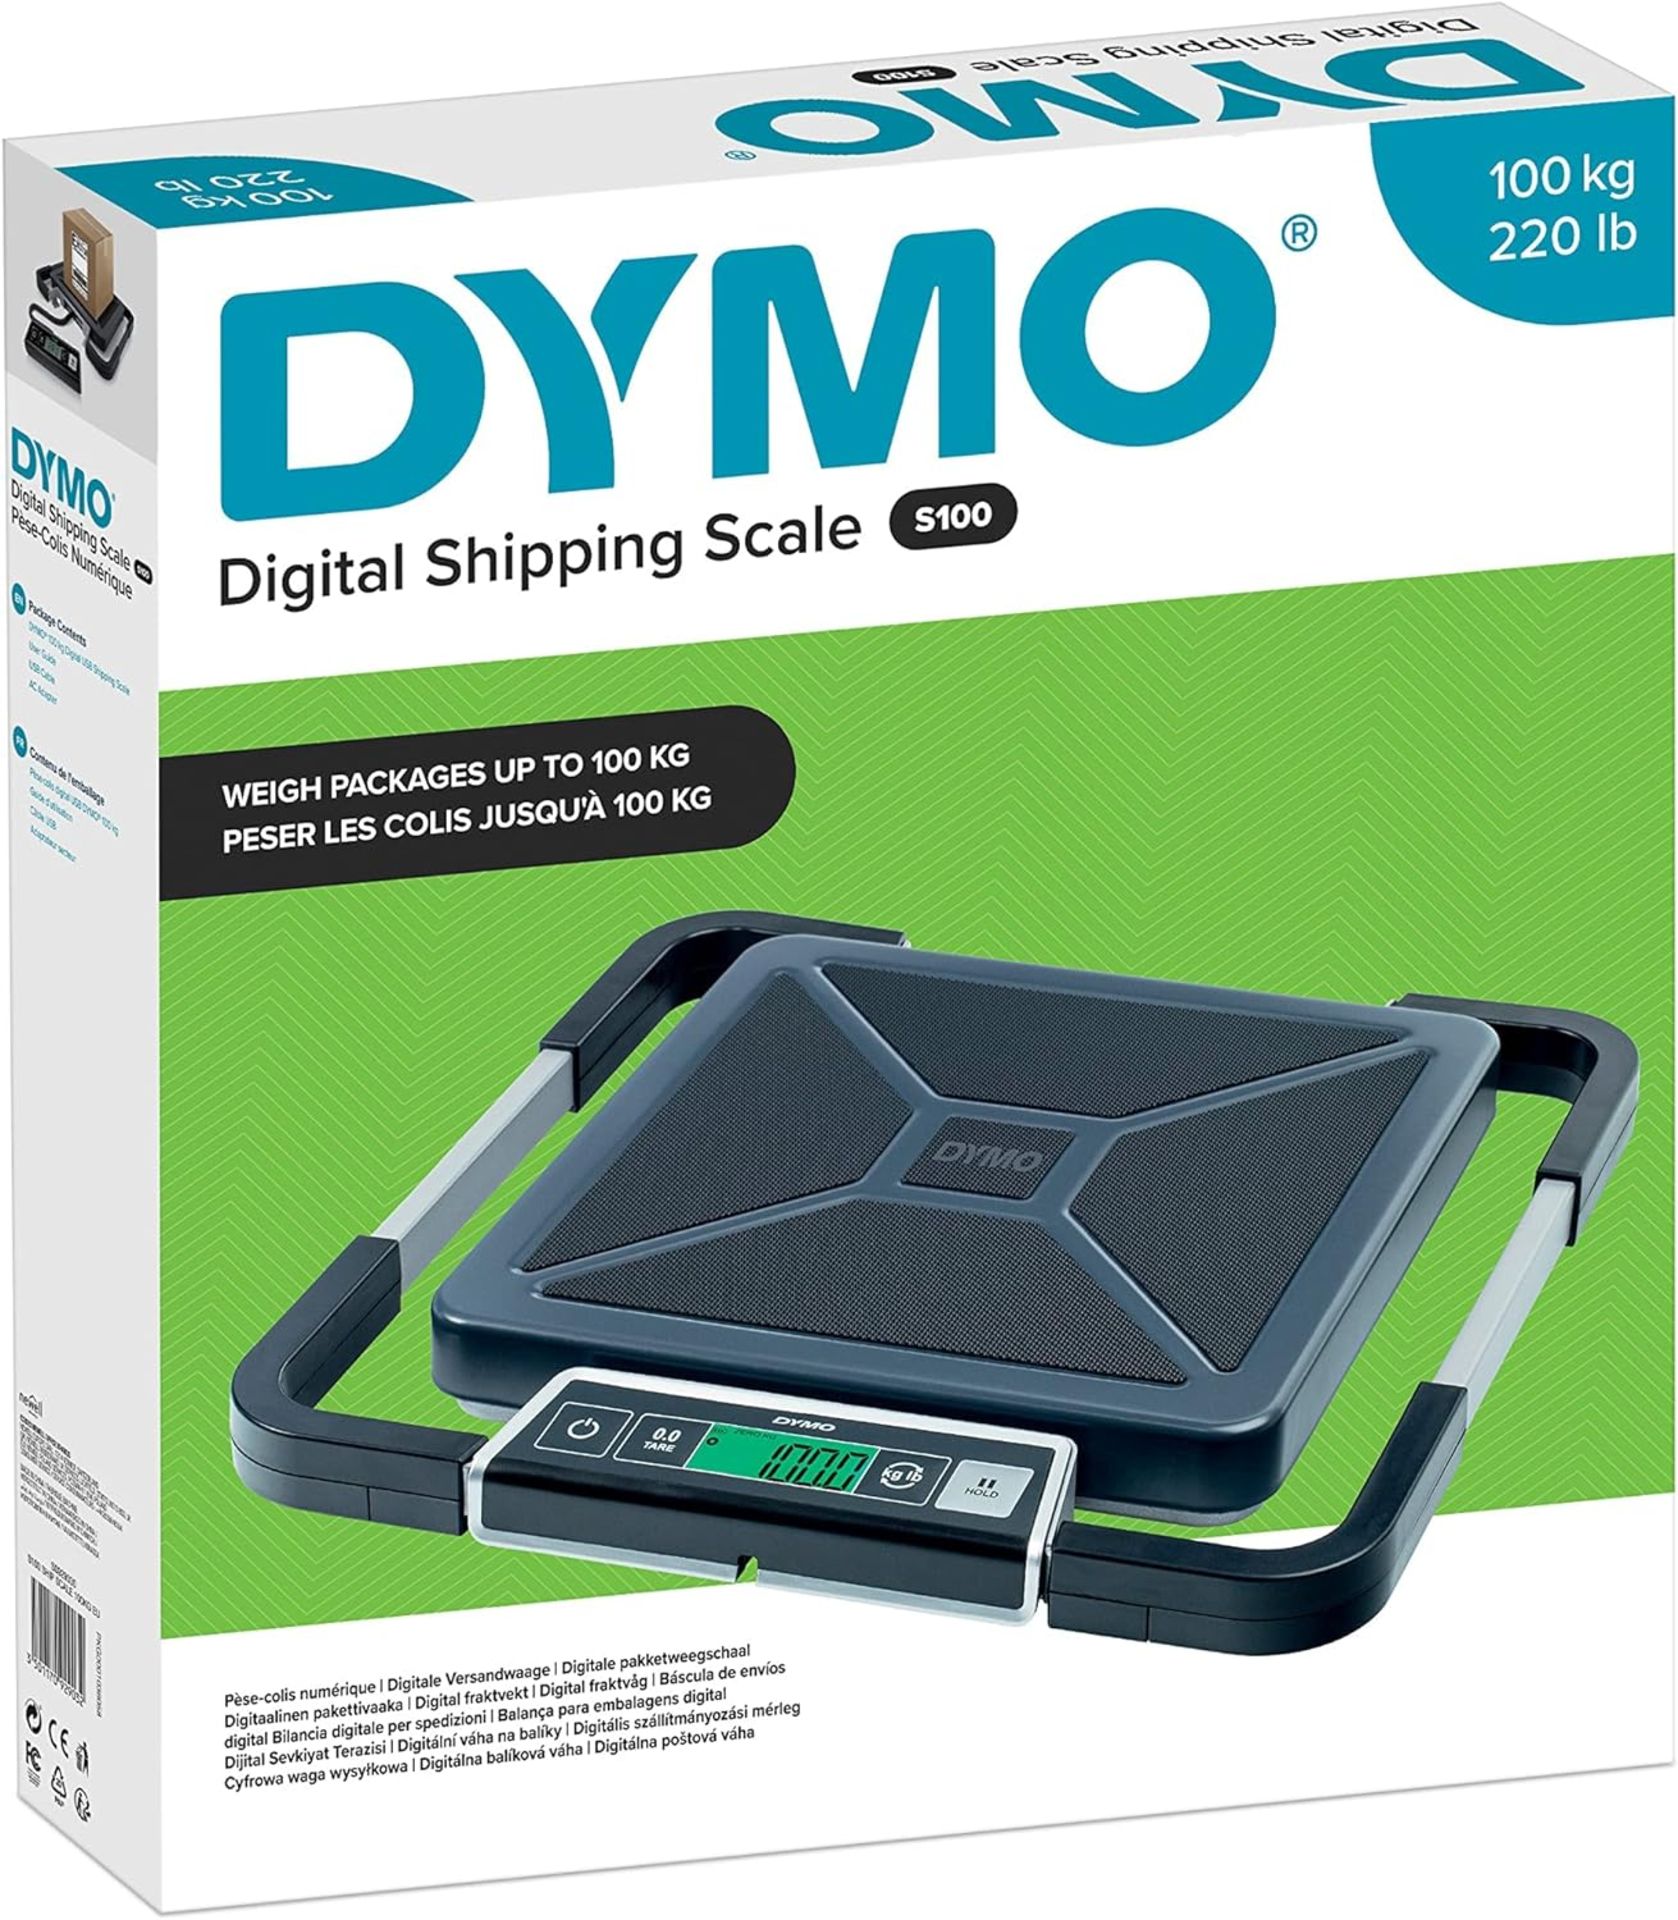 NEW & BOXED DYMO S100 Digital Shipping Scale. RRP £280. Rugged, heavy-duty, portable digital